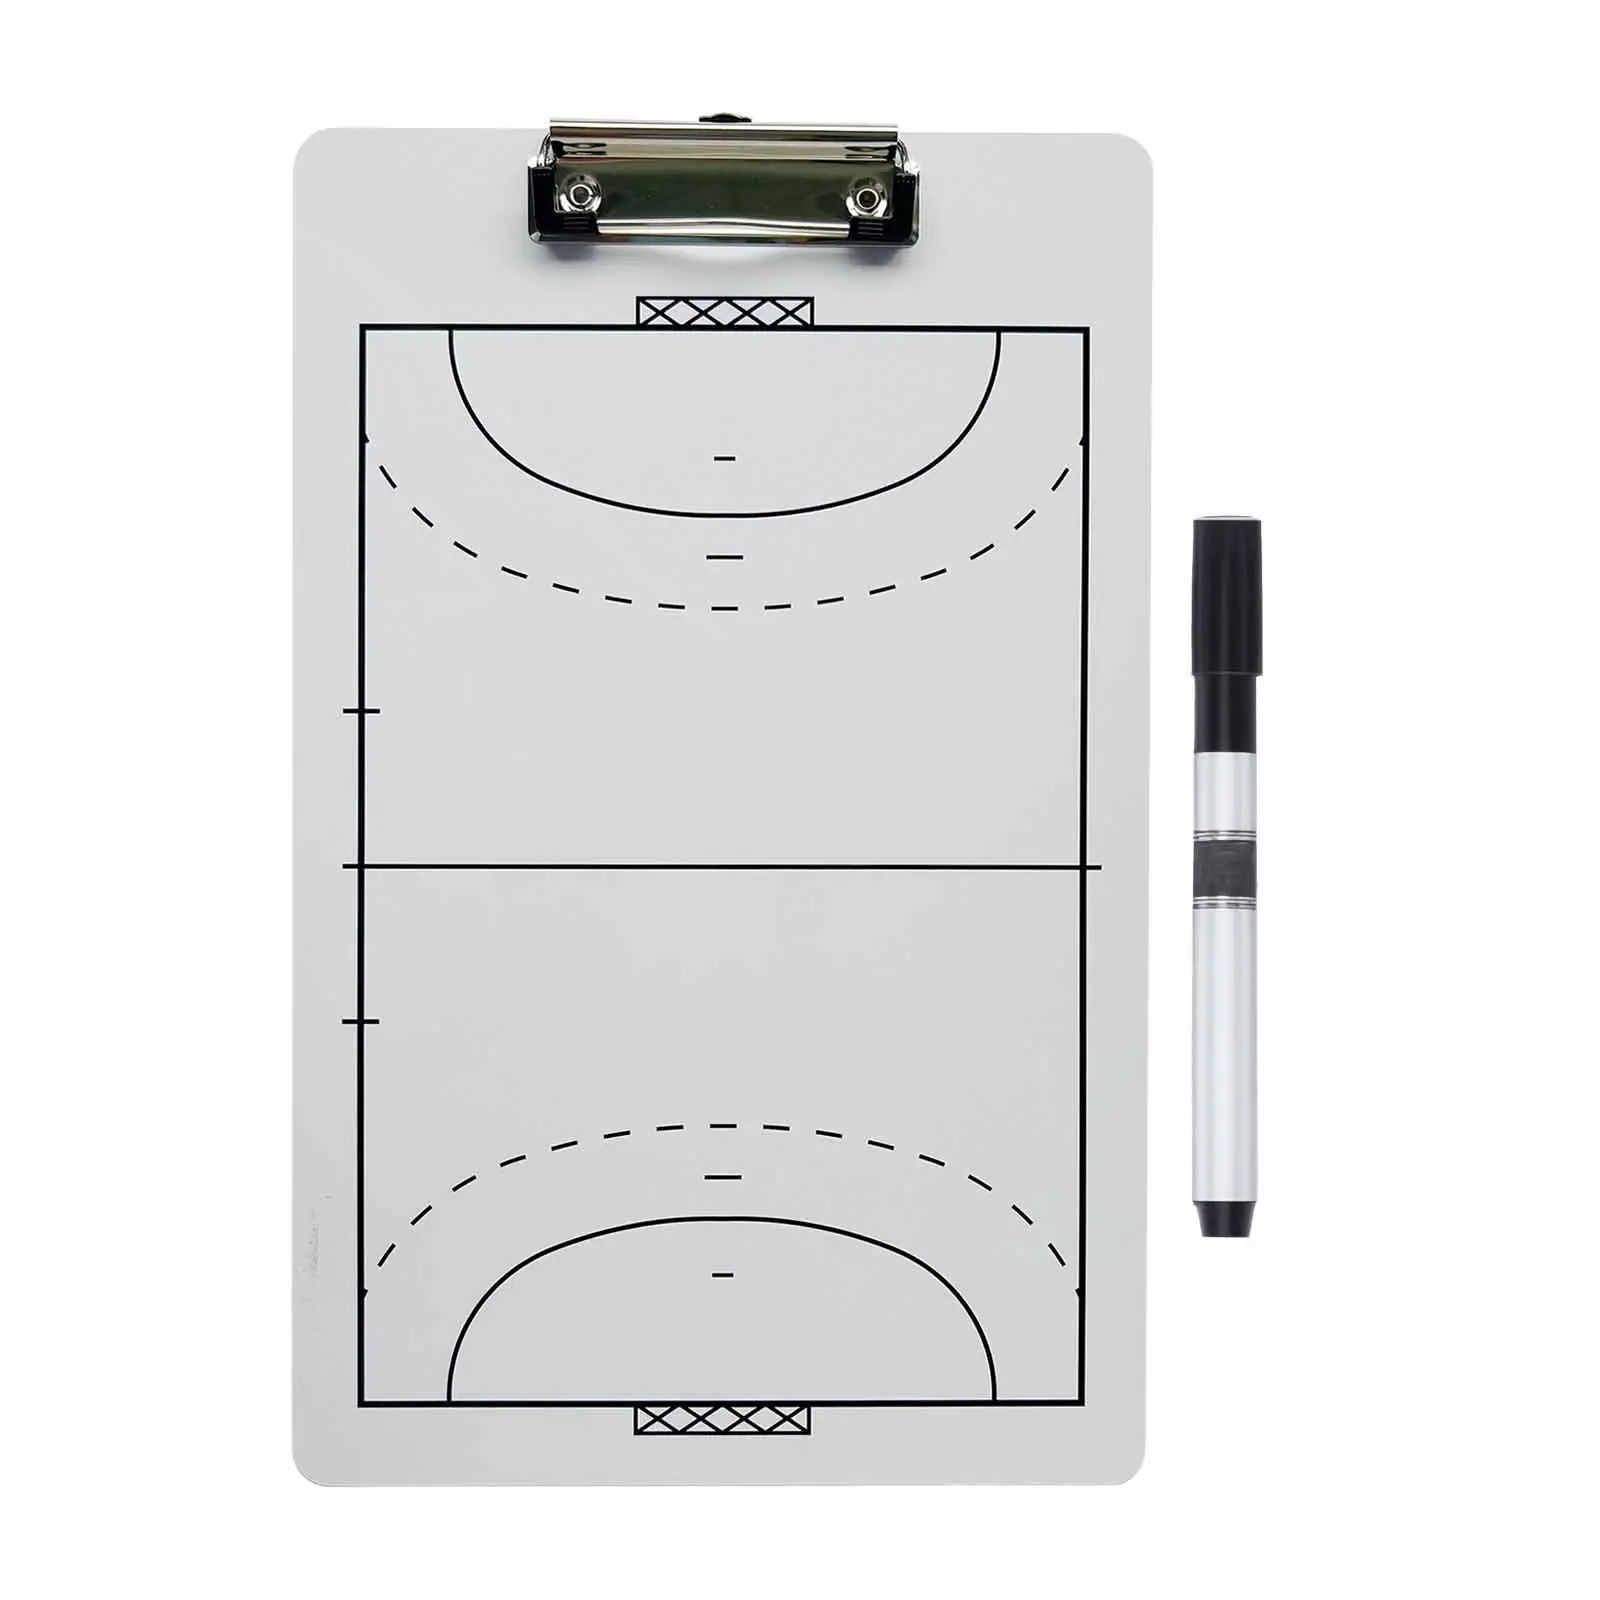 Volleyball Coaching Boards Football Coaching Boards Display Board Teaching